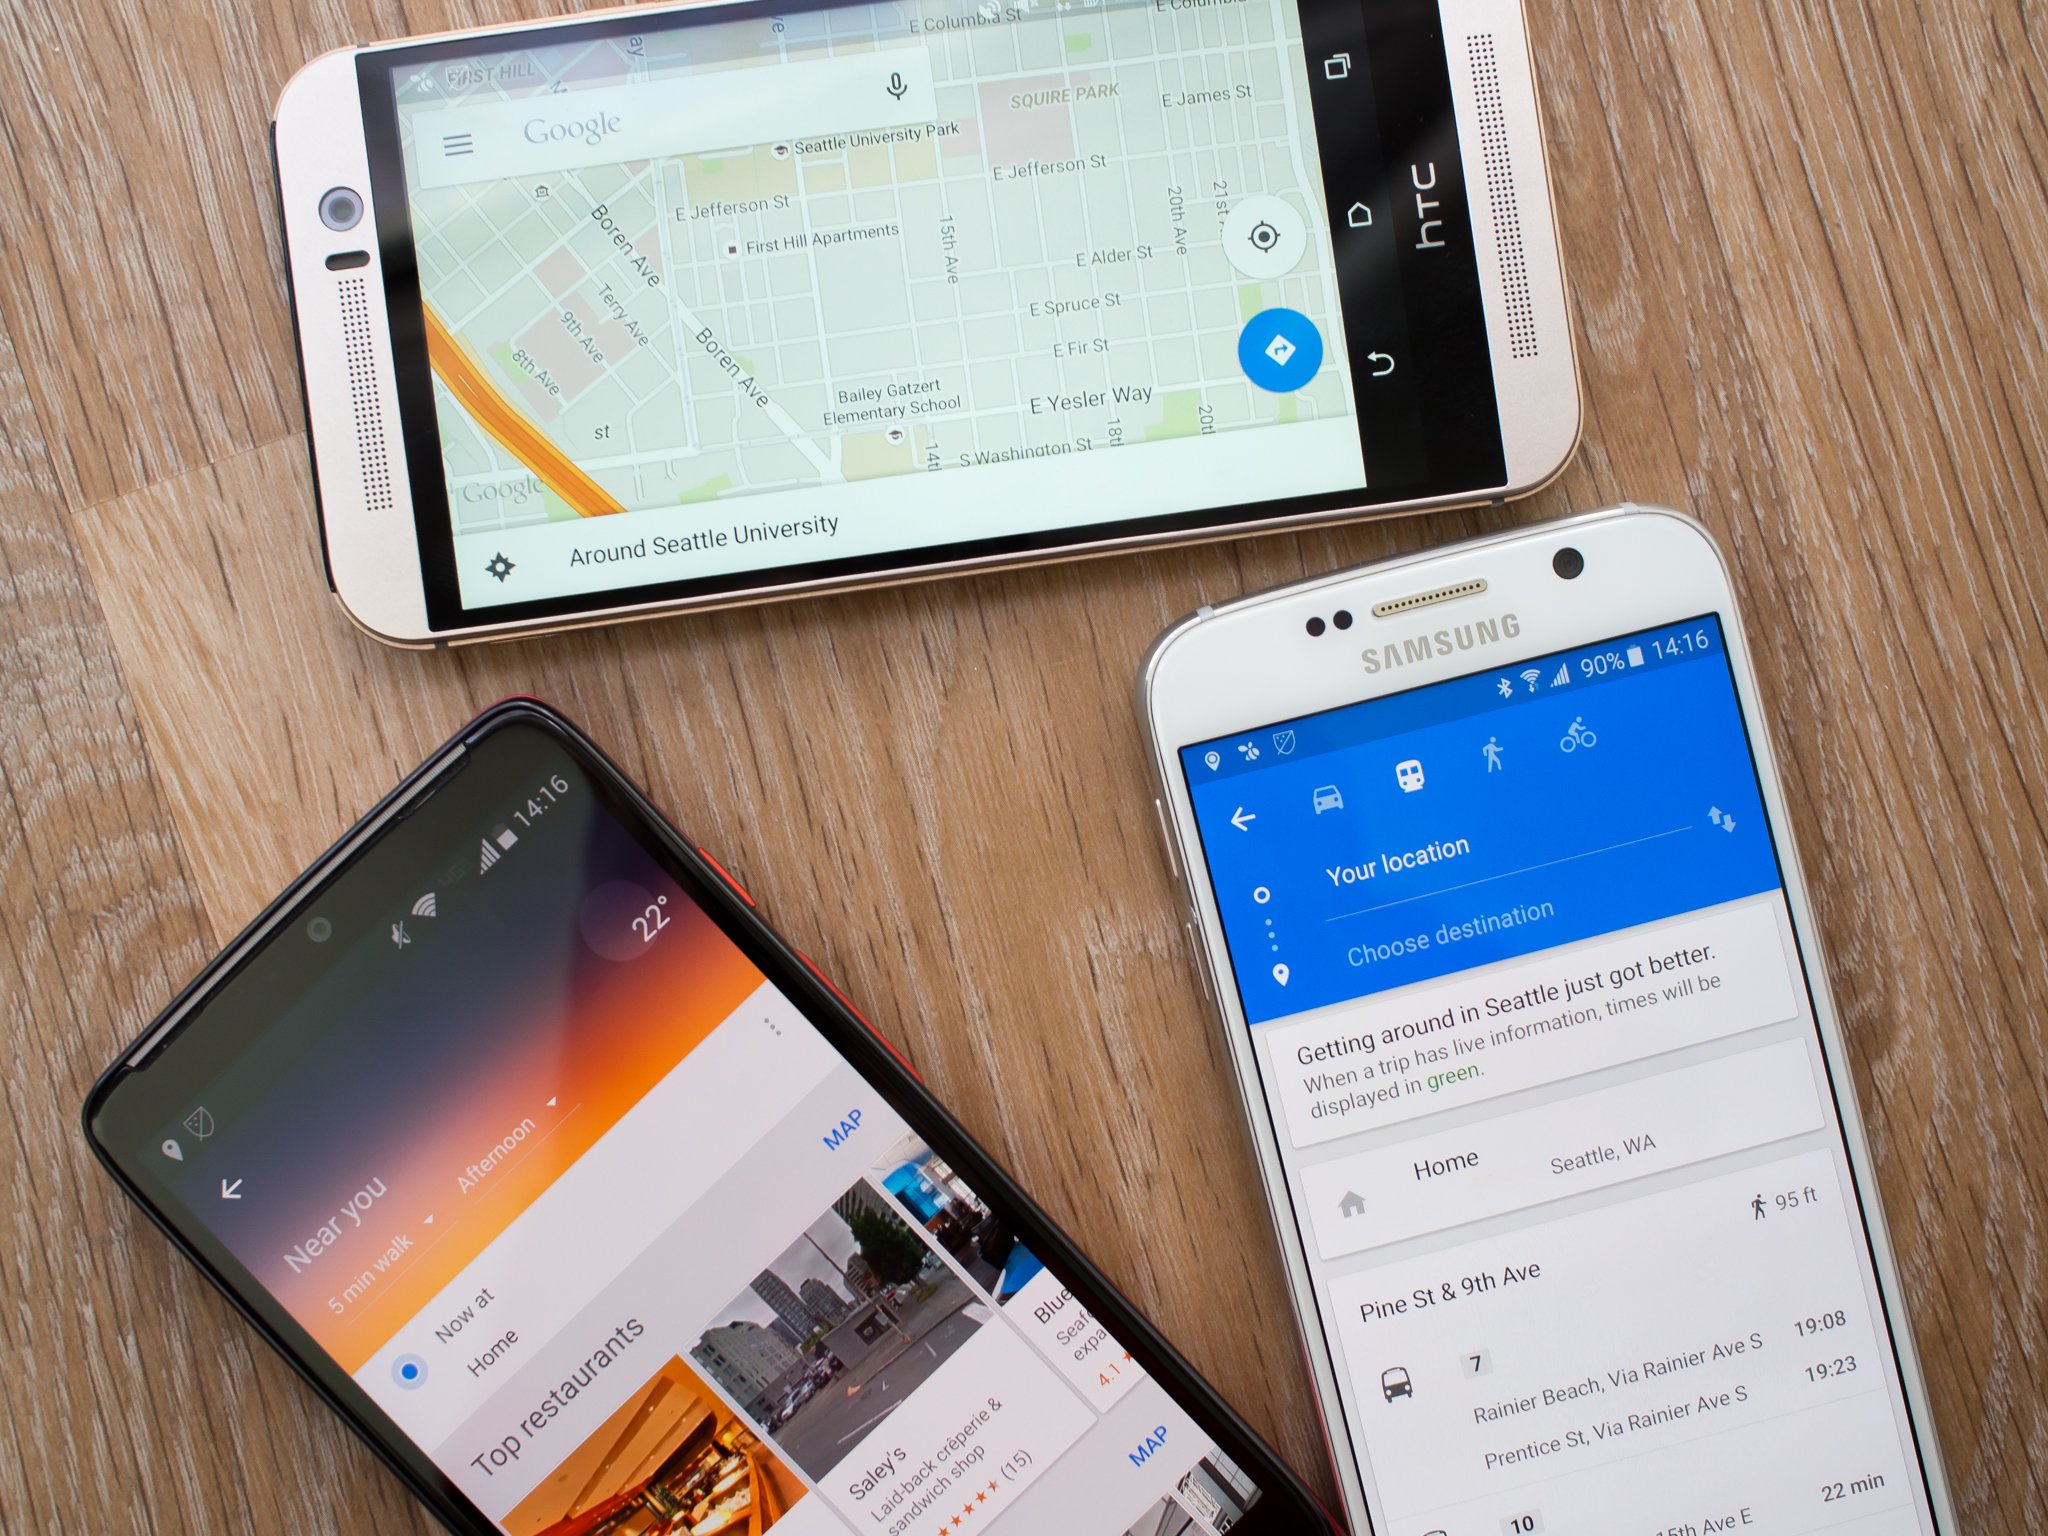 Google Maps on Android